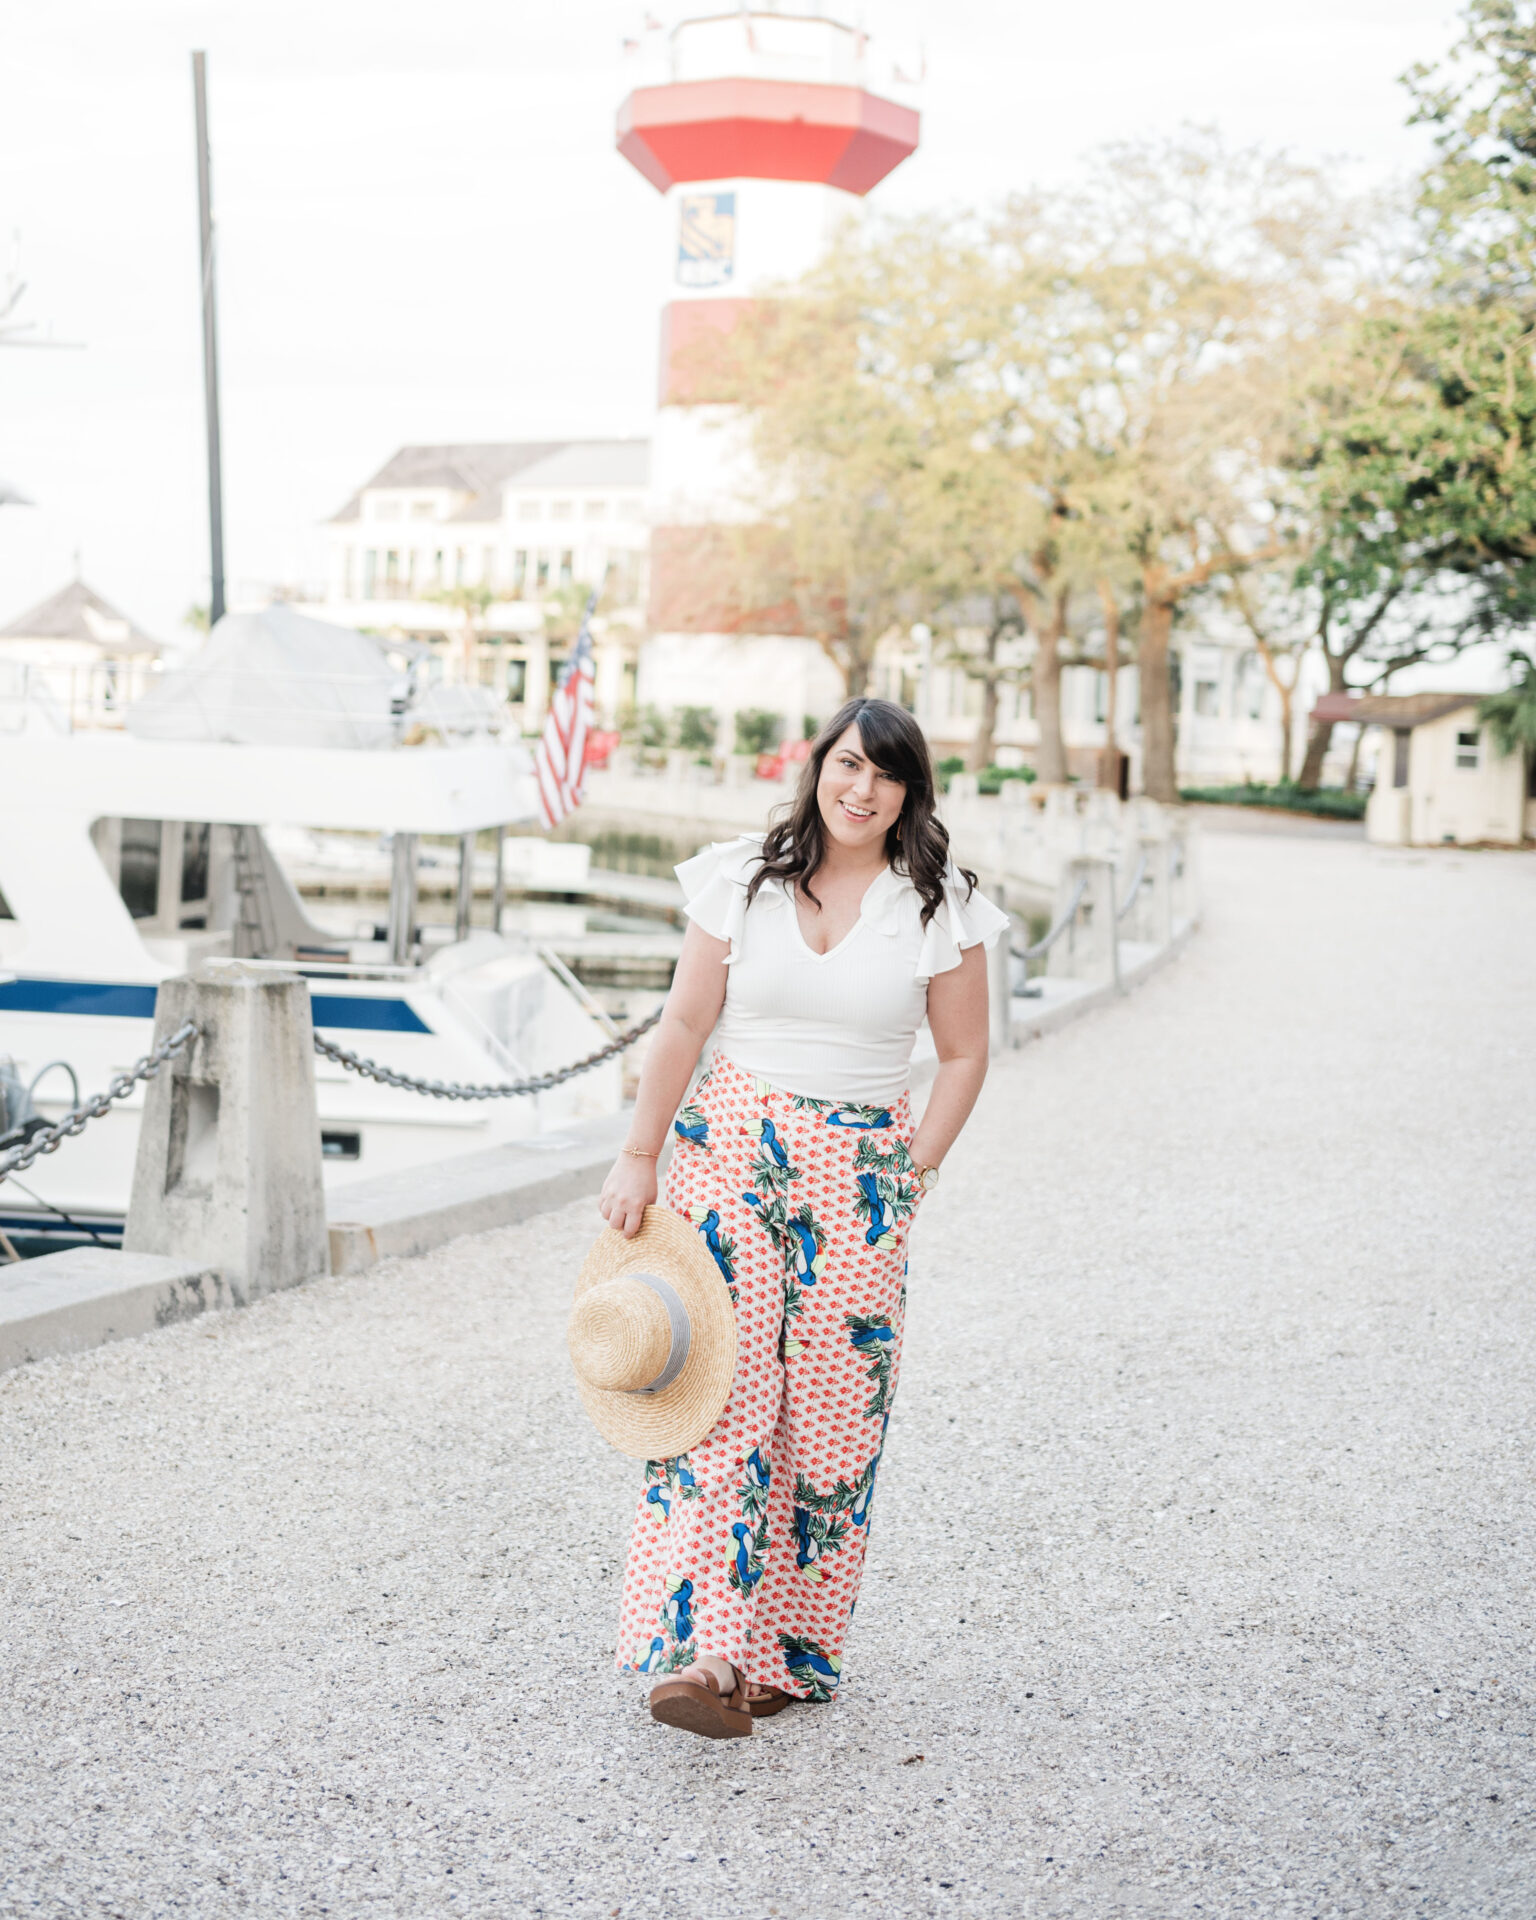 Brittney Naylor wearing tropical pants and white blouse walking through Harbour Town in Hilton Head Island. Harbour Town Lighthouse is in the background and boats are to the side in the water.